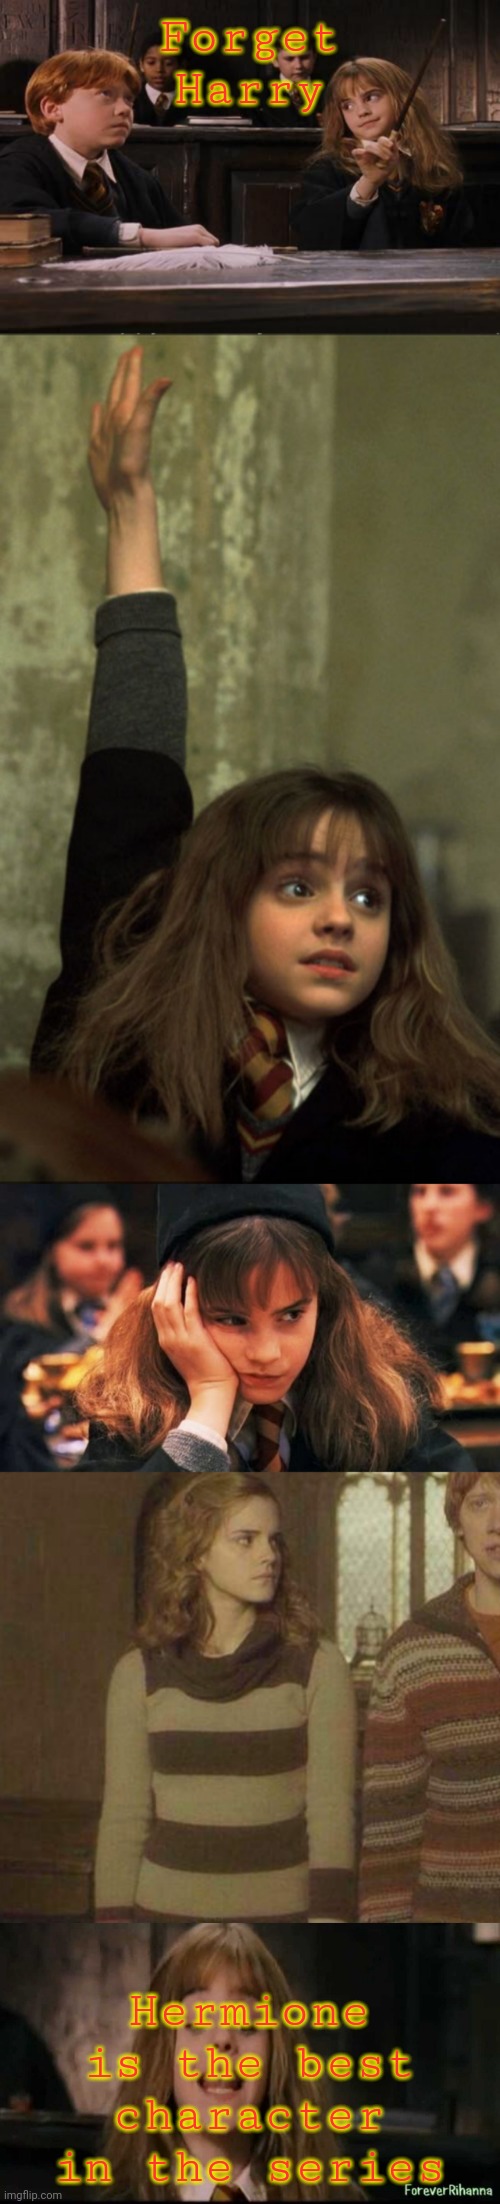 Forget Harry; Hermione is the best character in the series | image tagged in hermione granger,hermione,bored hermione,why is it when something happens it is always you three | made w/ Imgflip meme maker